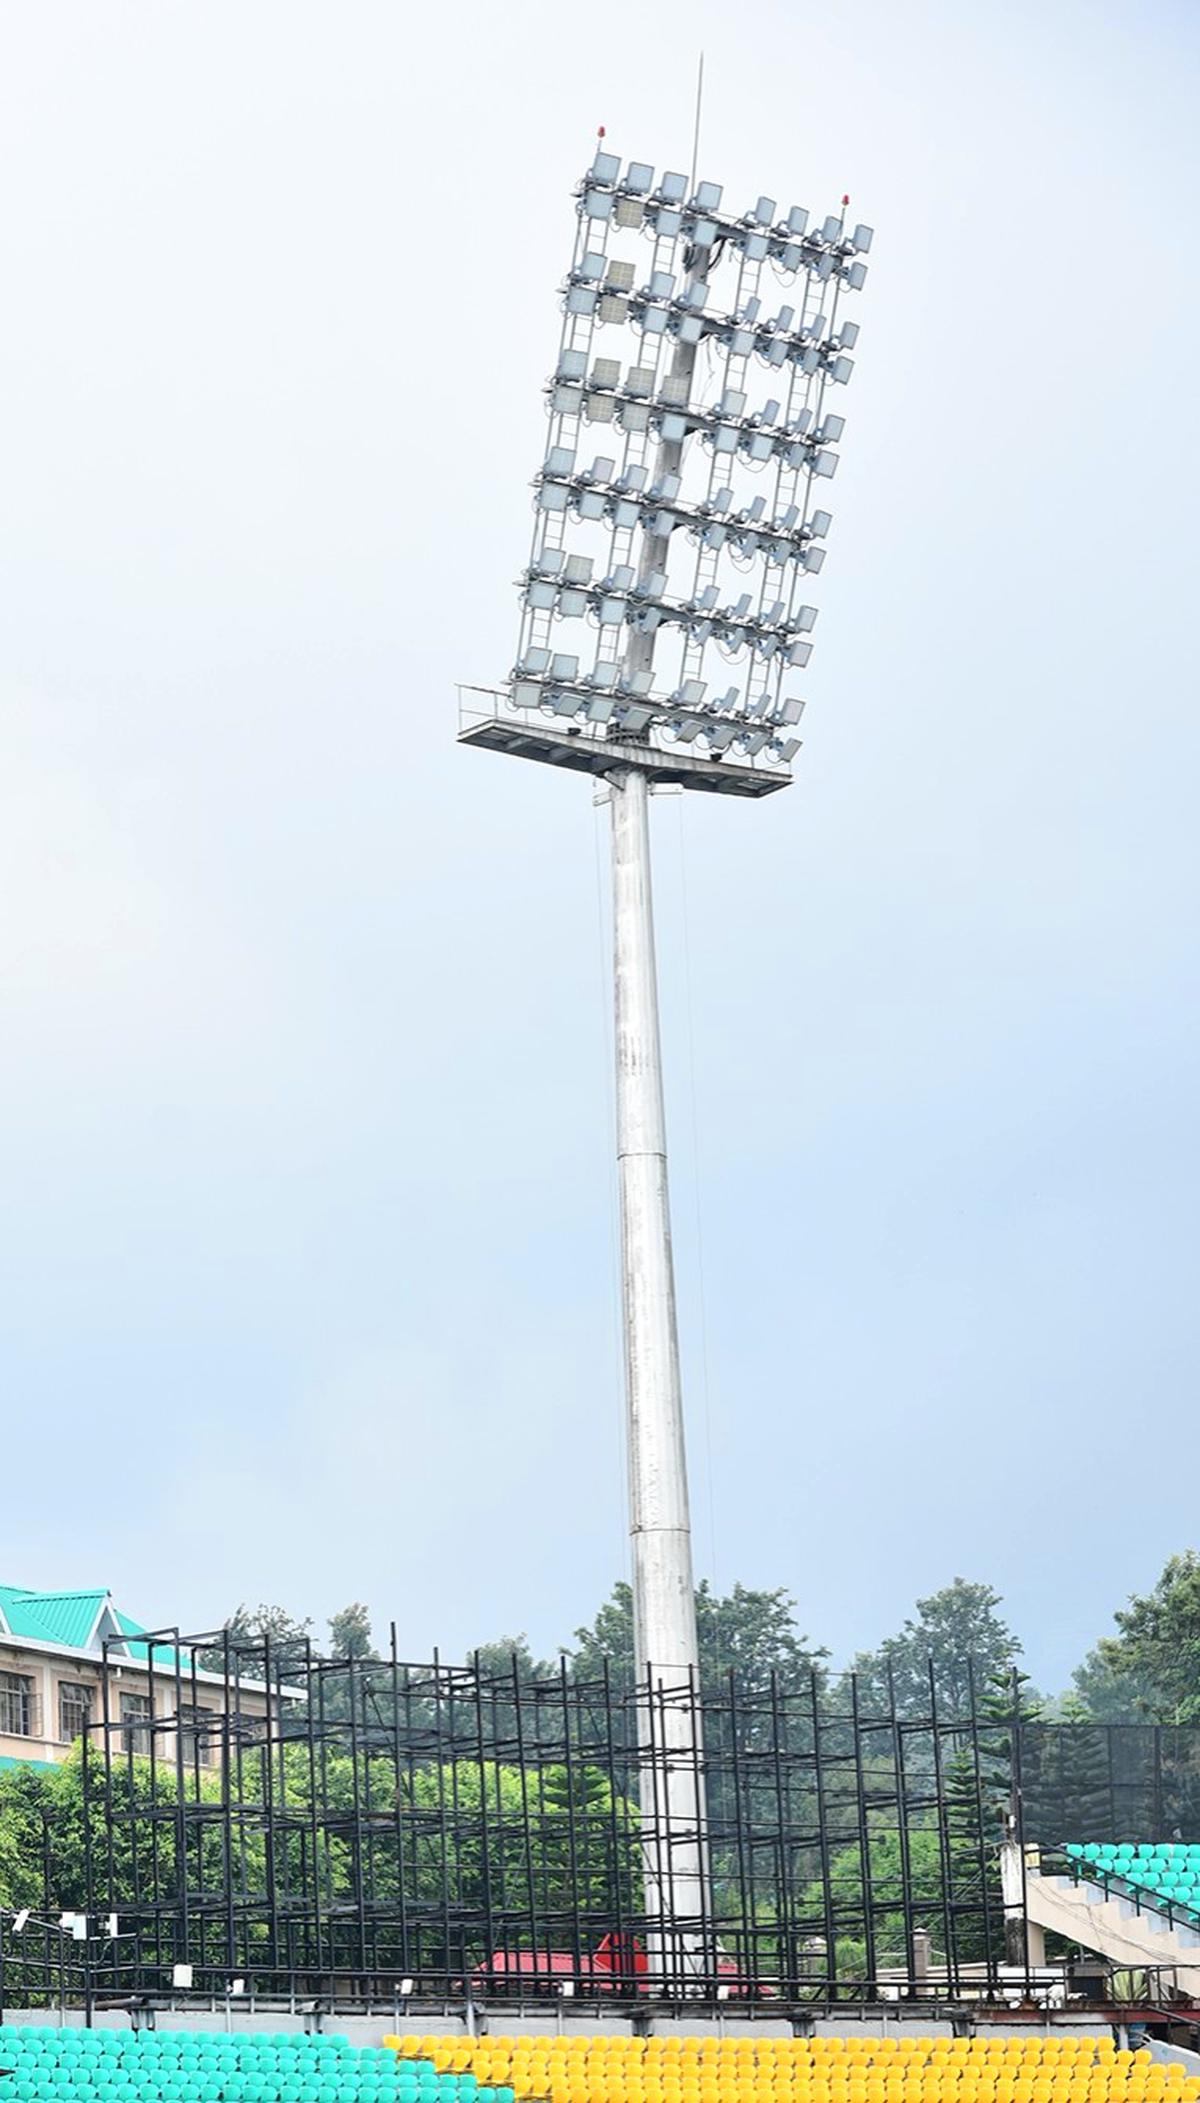 There are four LED towers with 400 LED fixtures. 